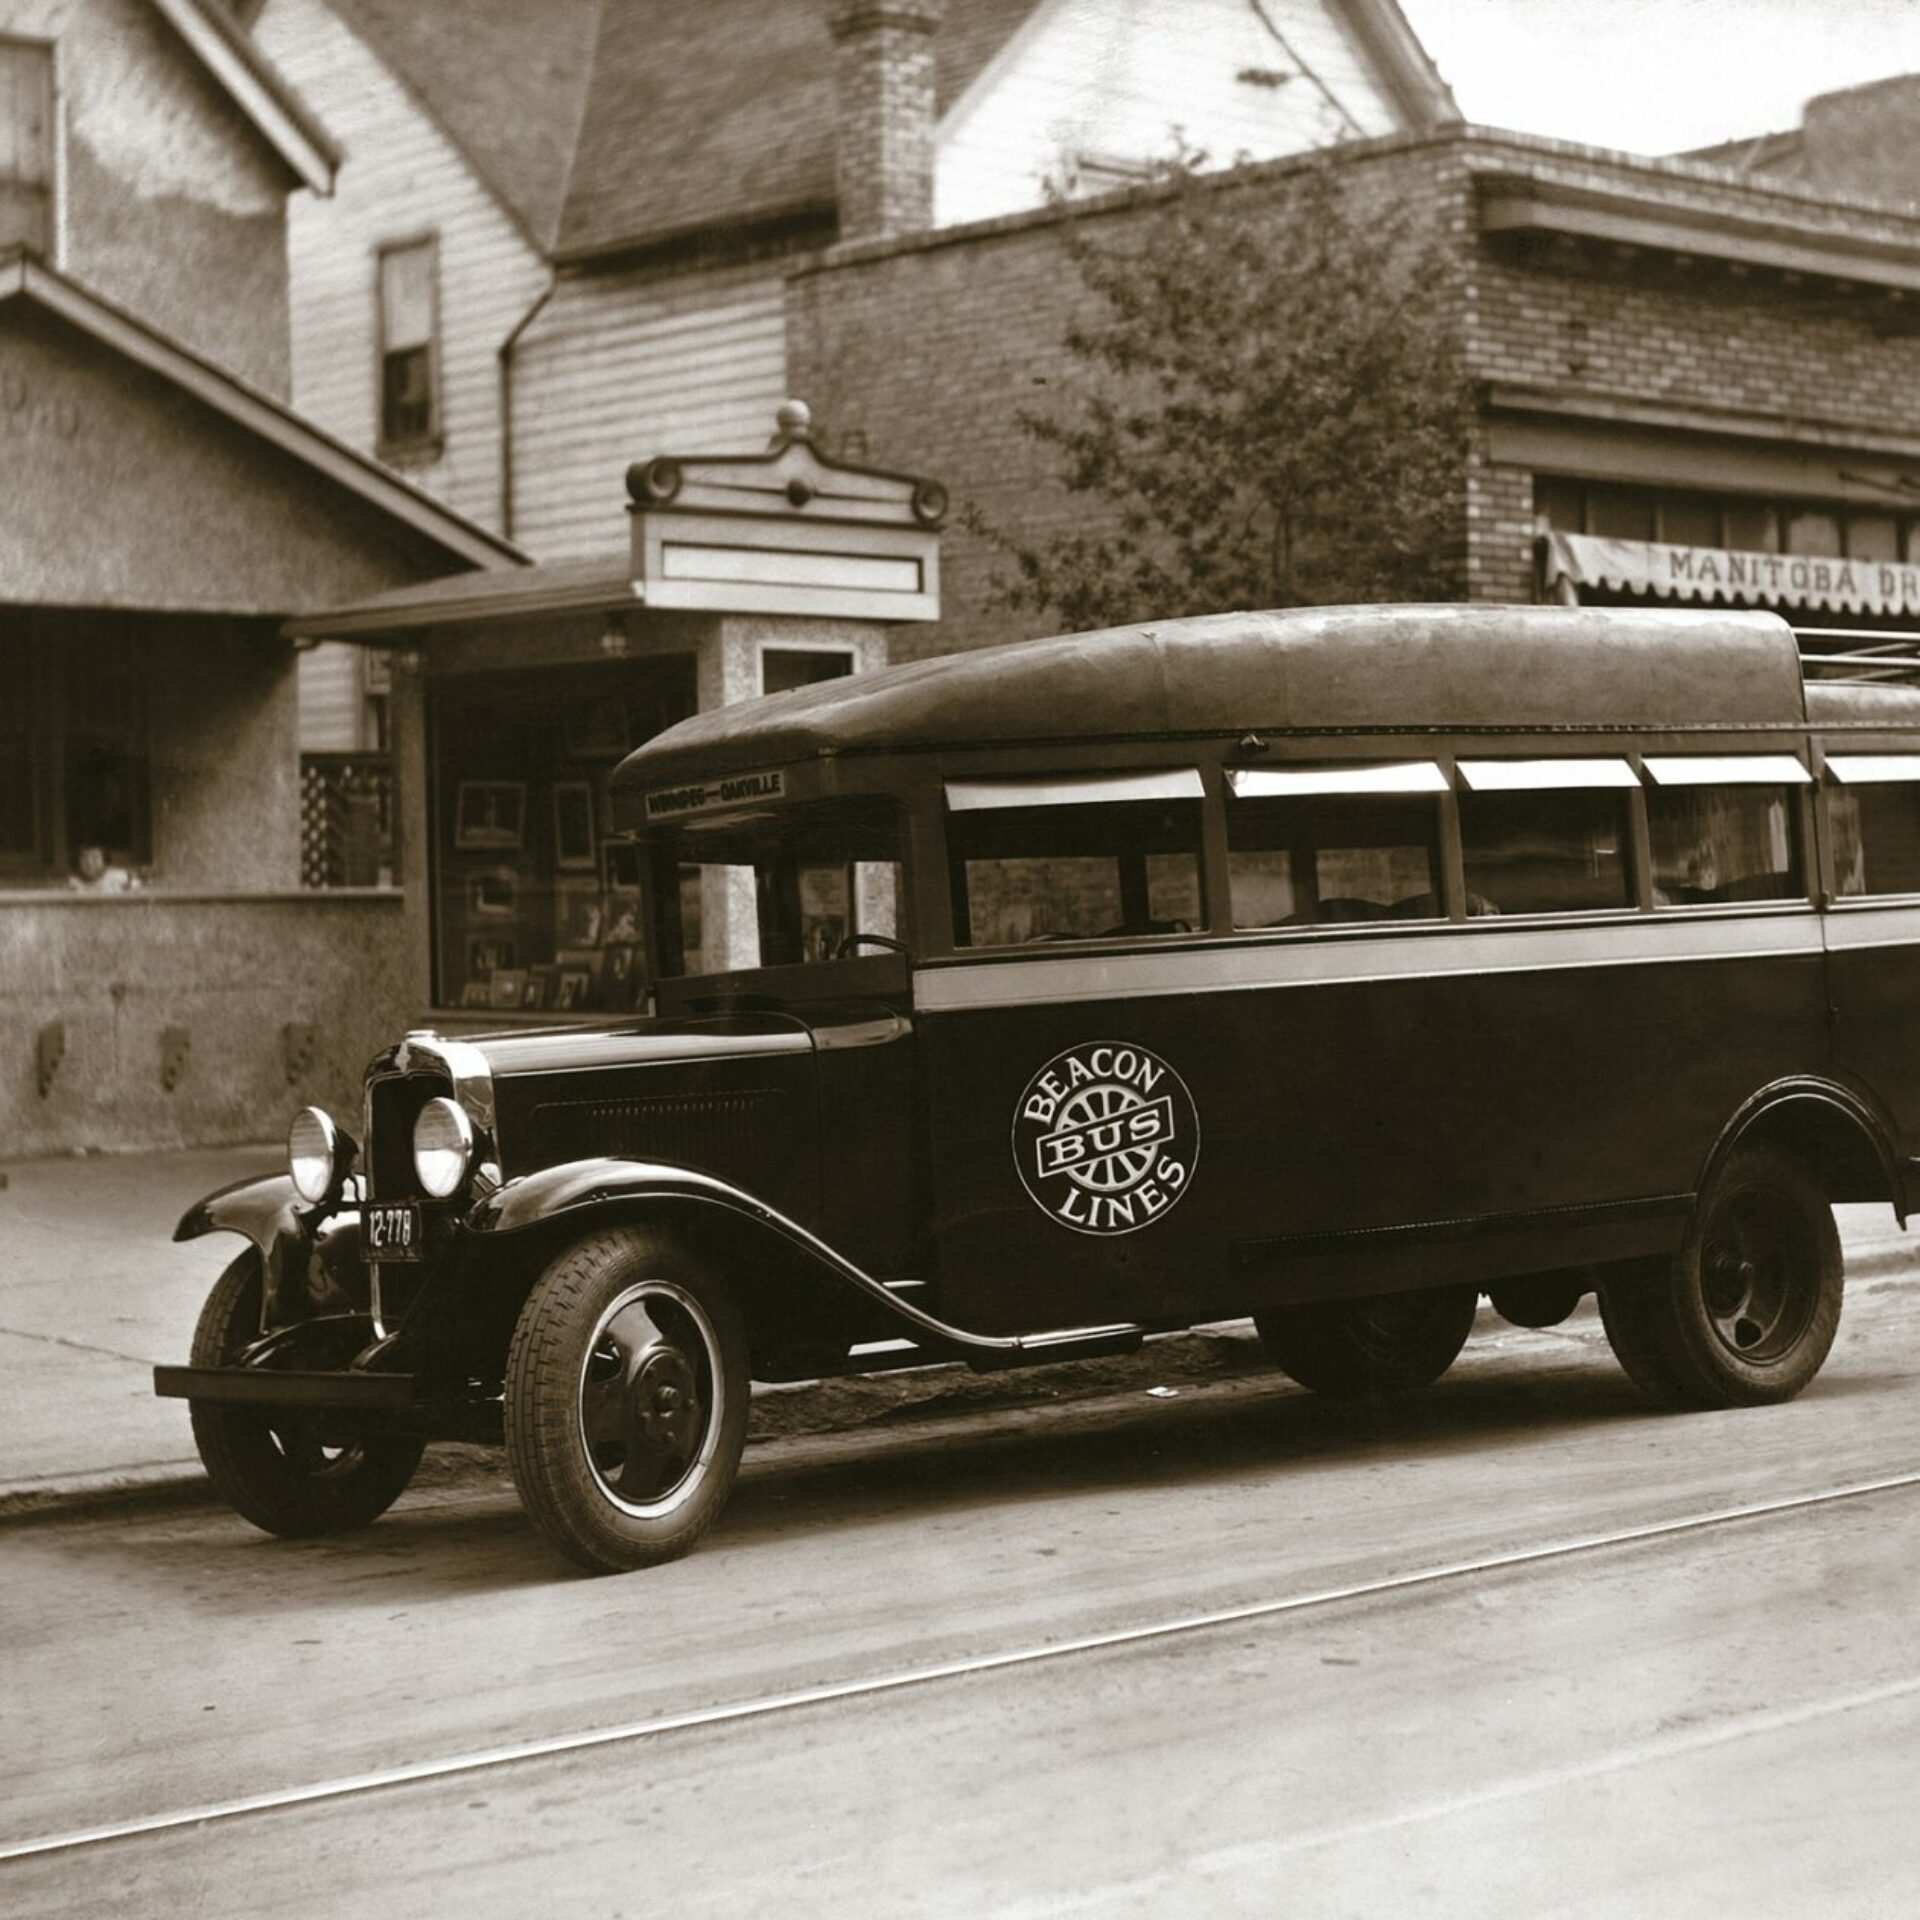 New Flyer bus, 1930 year